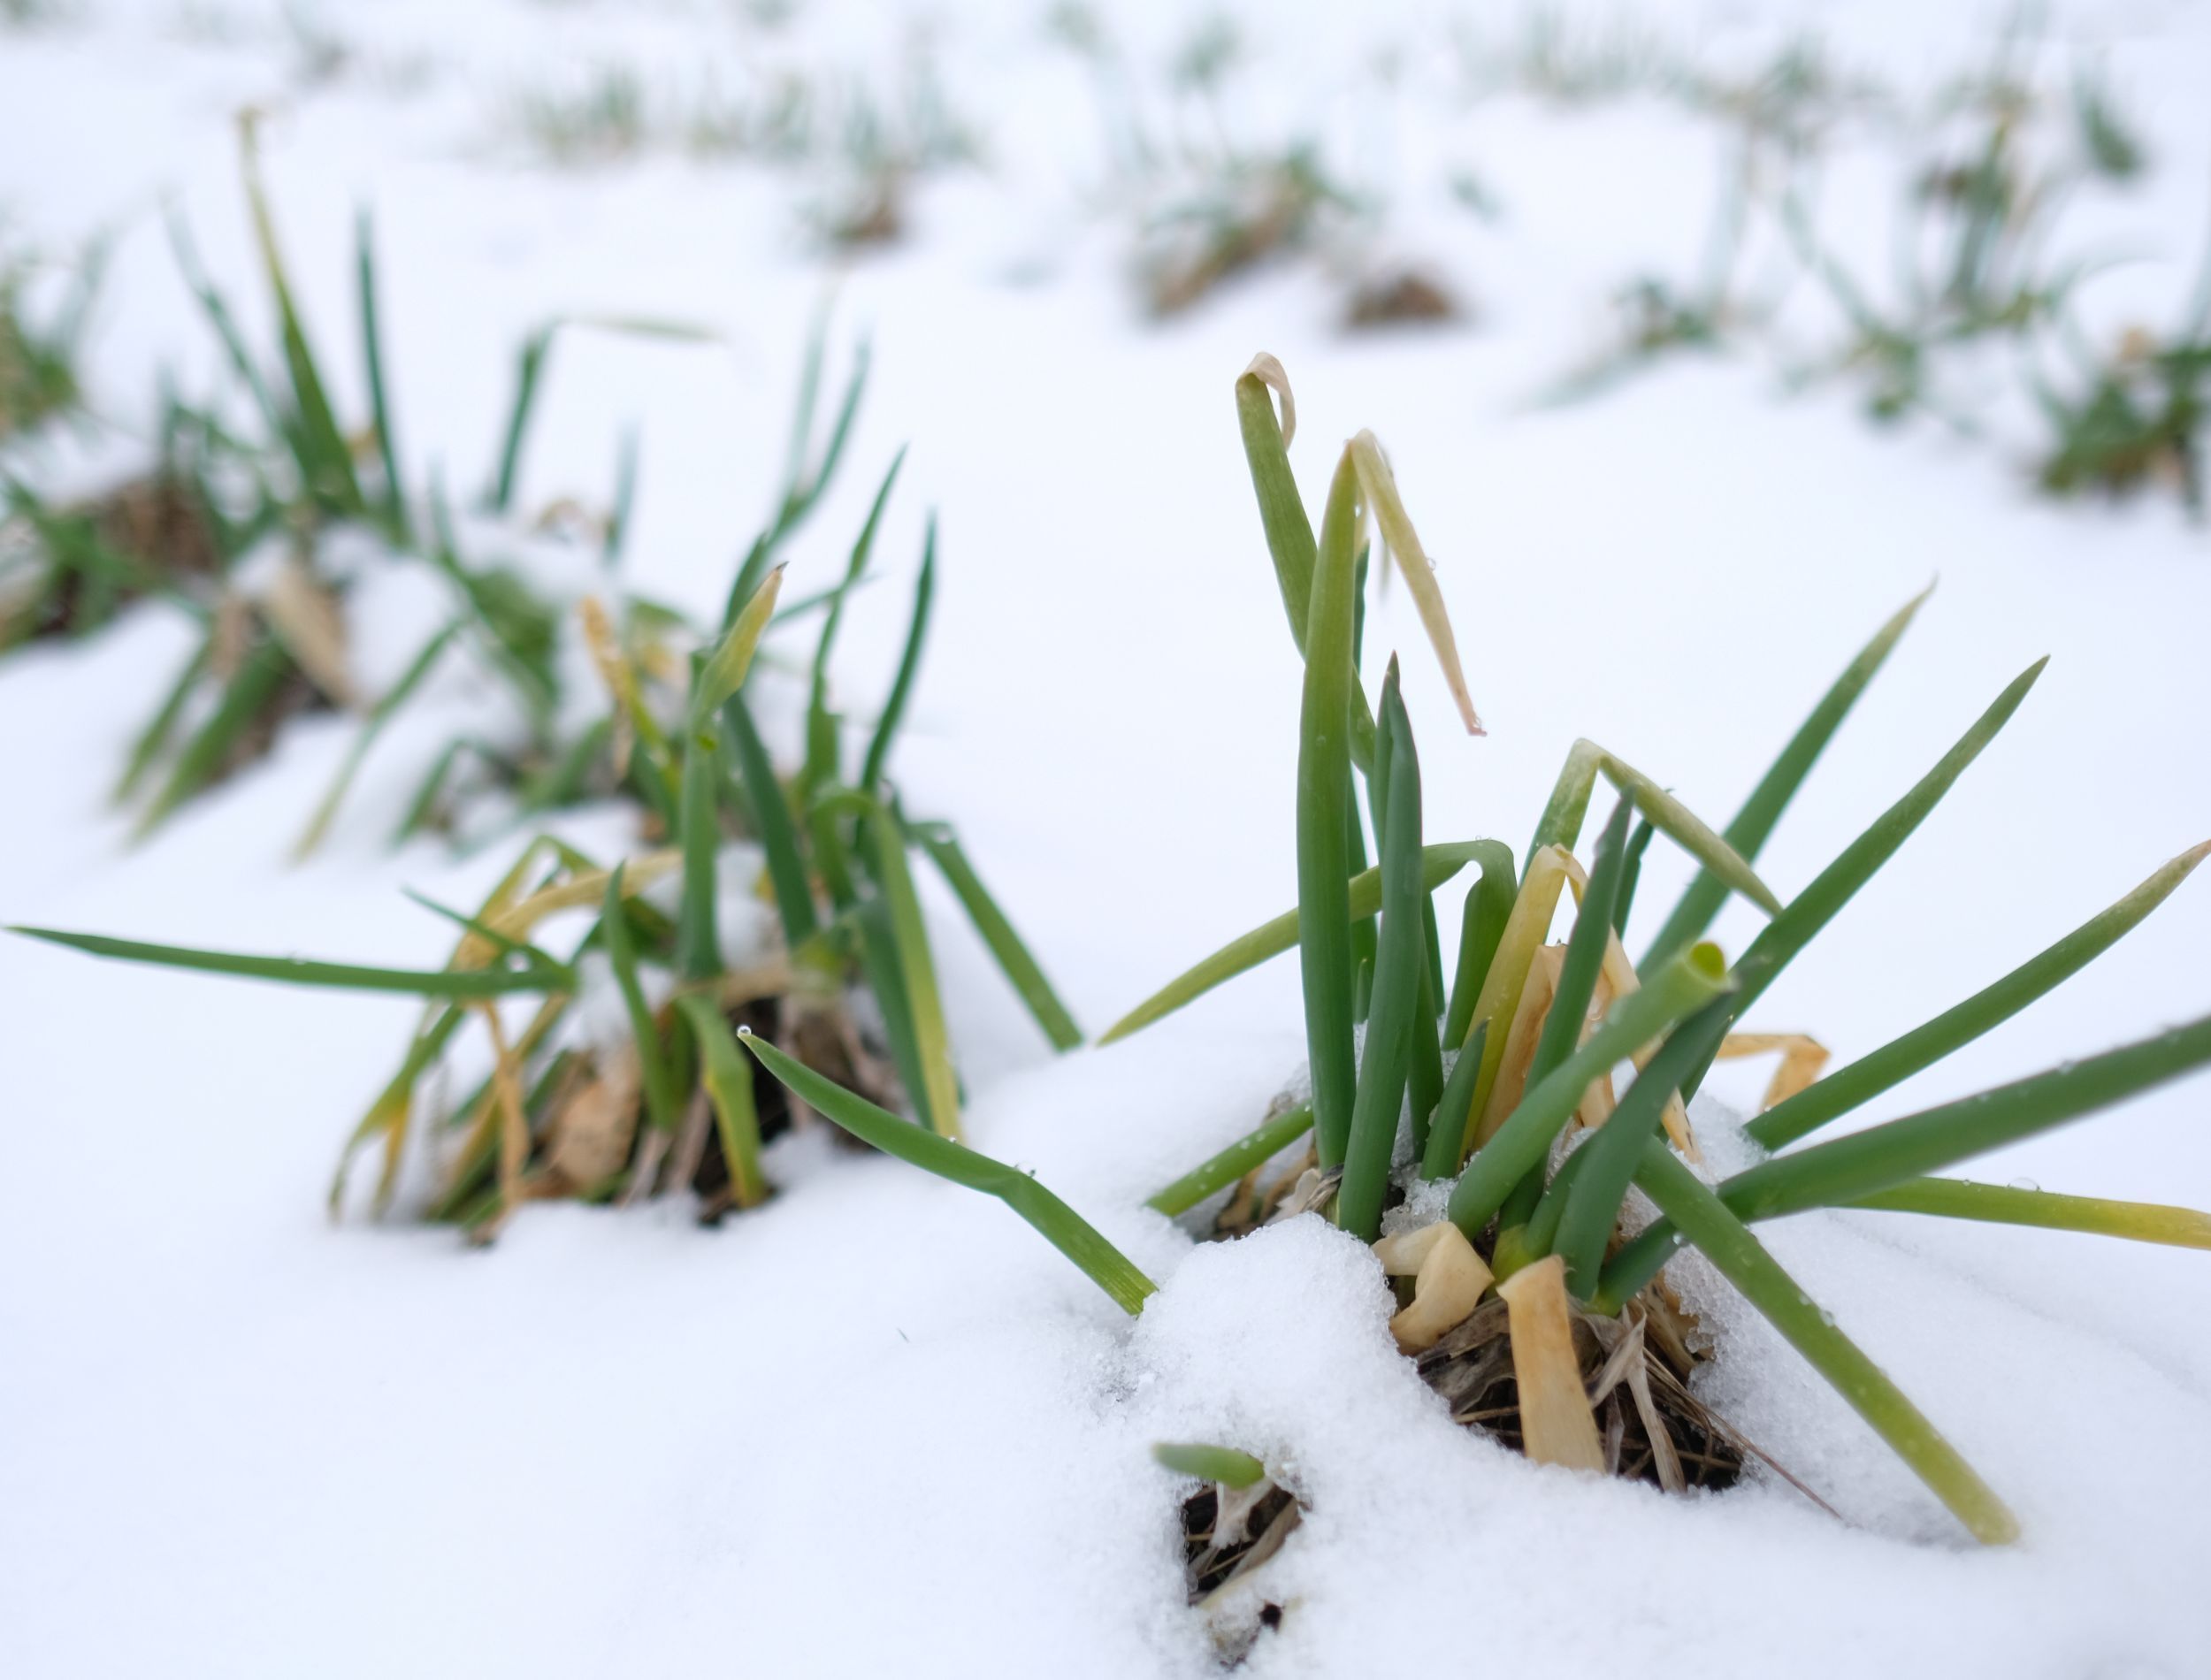 Snow and onions in a winter vegetable garden